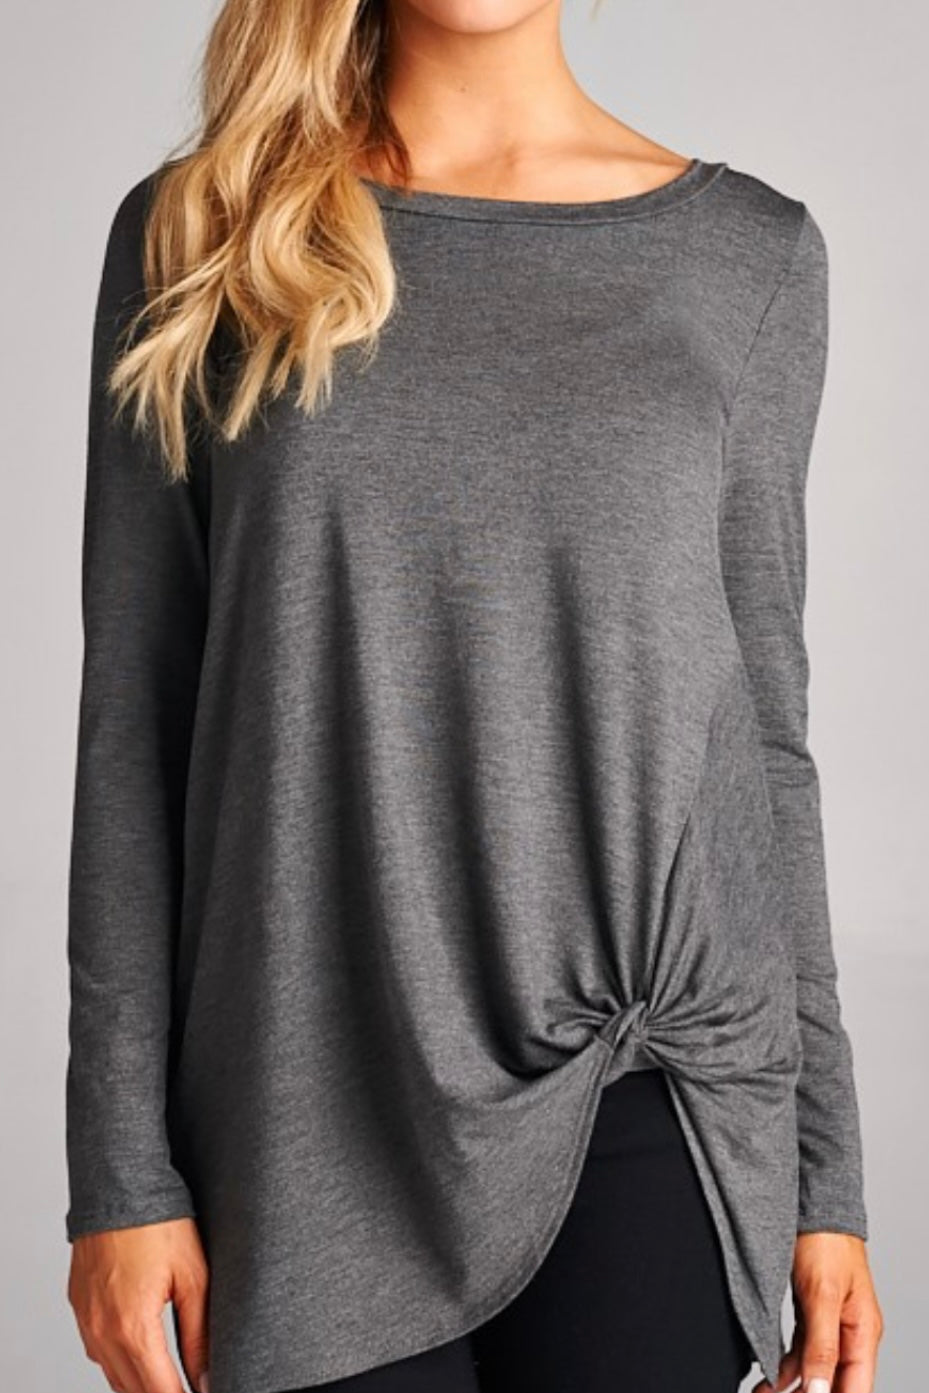 LONG SLEEVE TOP WITH SIDE TWIST KNOT DETAIL